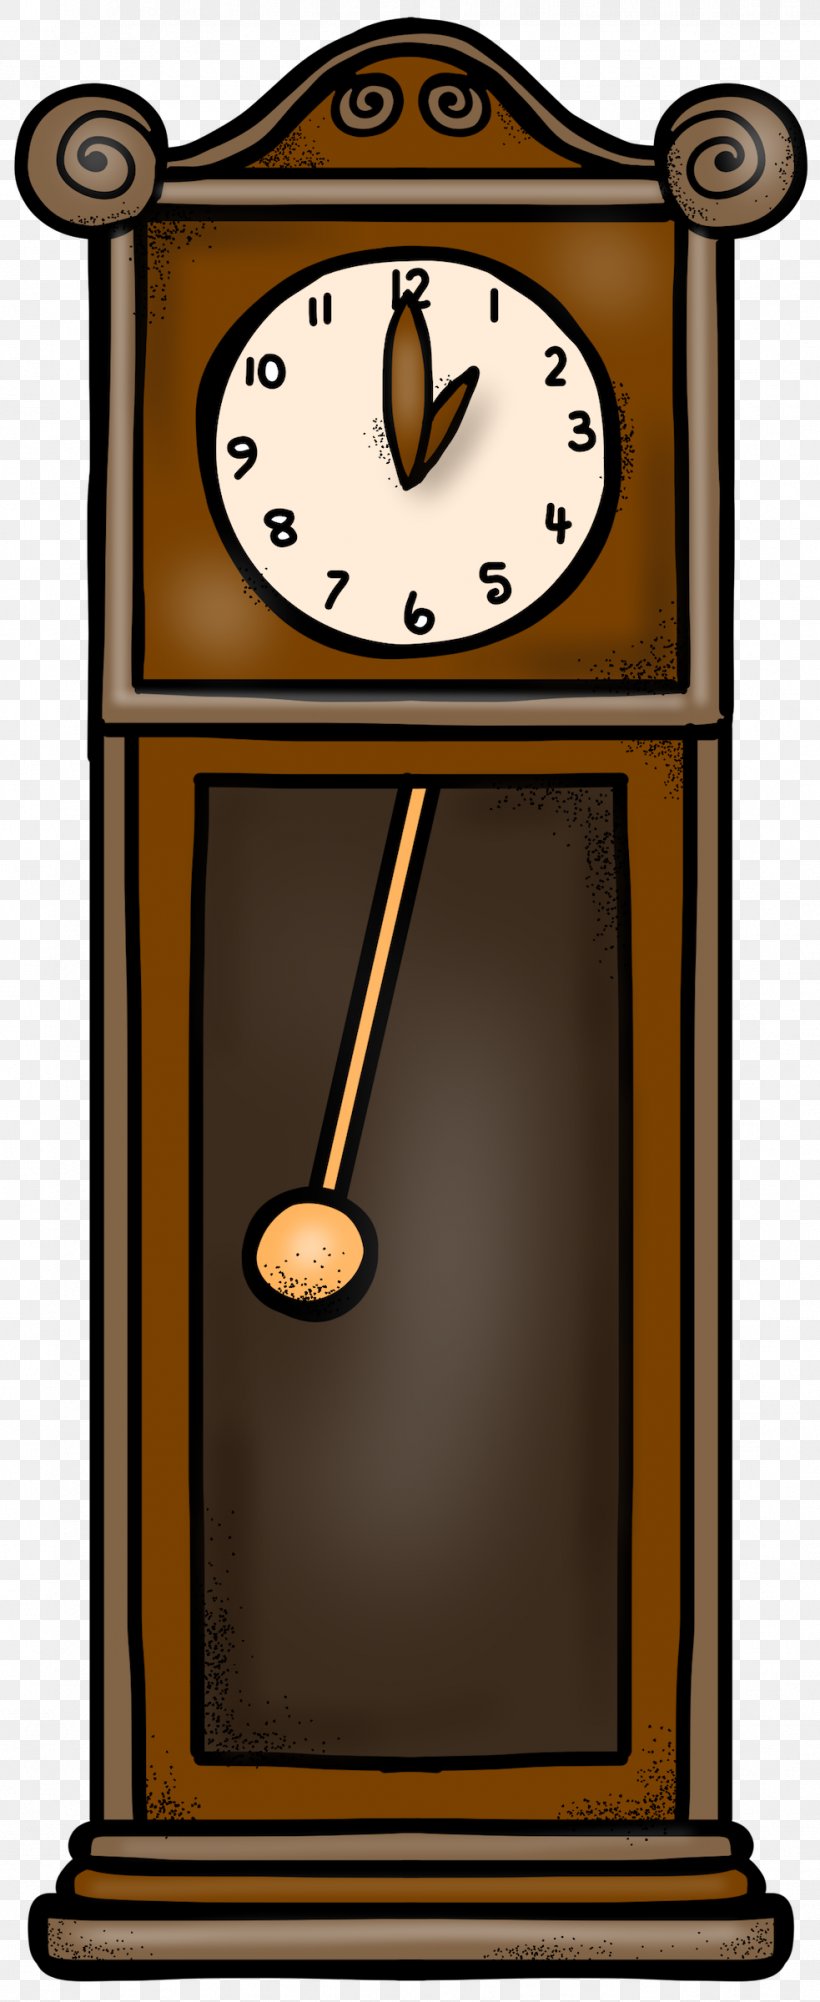 The Clock Struck One: A Time-Telling Tale Hickory Dickory Dock Clip Art, PNG, 983x2400px, Clock, Alarm Clocks, Clock Struck One A Timetelling Tale, Digital Clock, Floor Grandfather Clocks Download Free